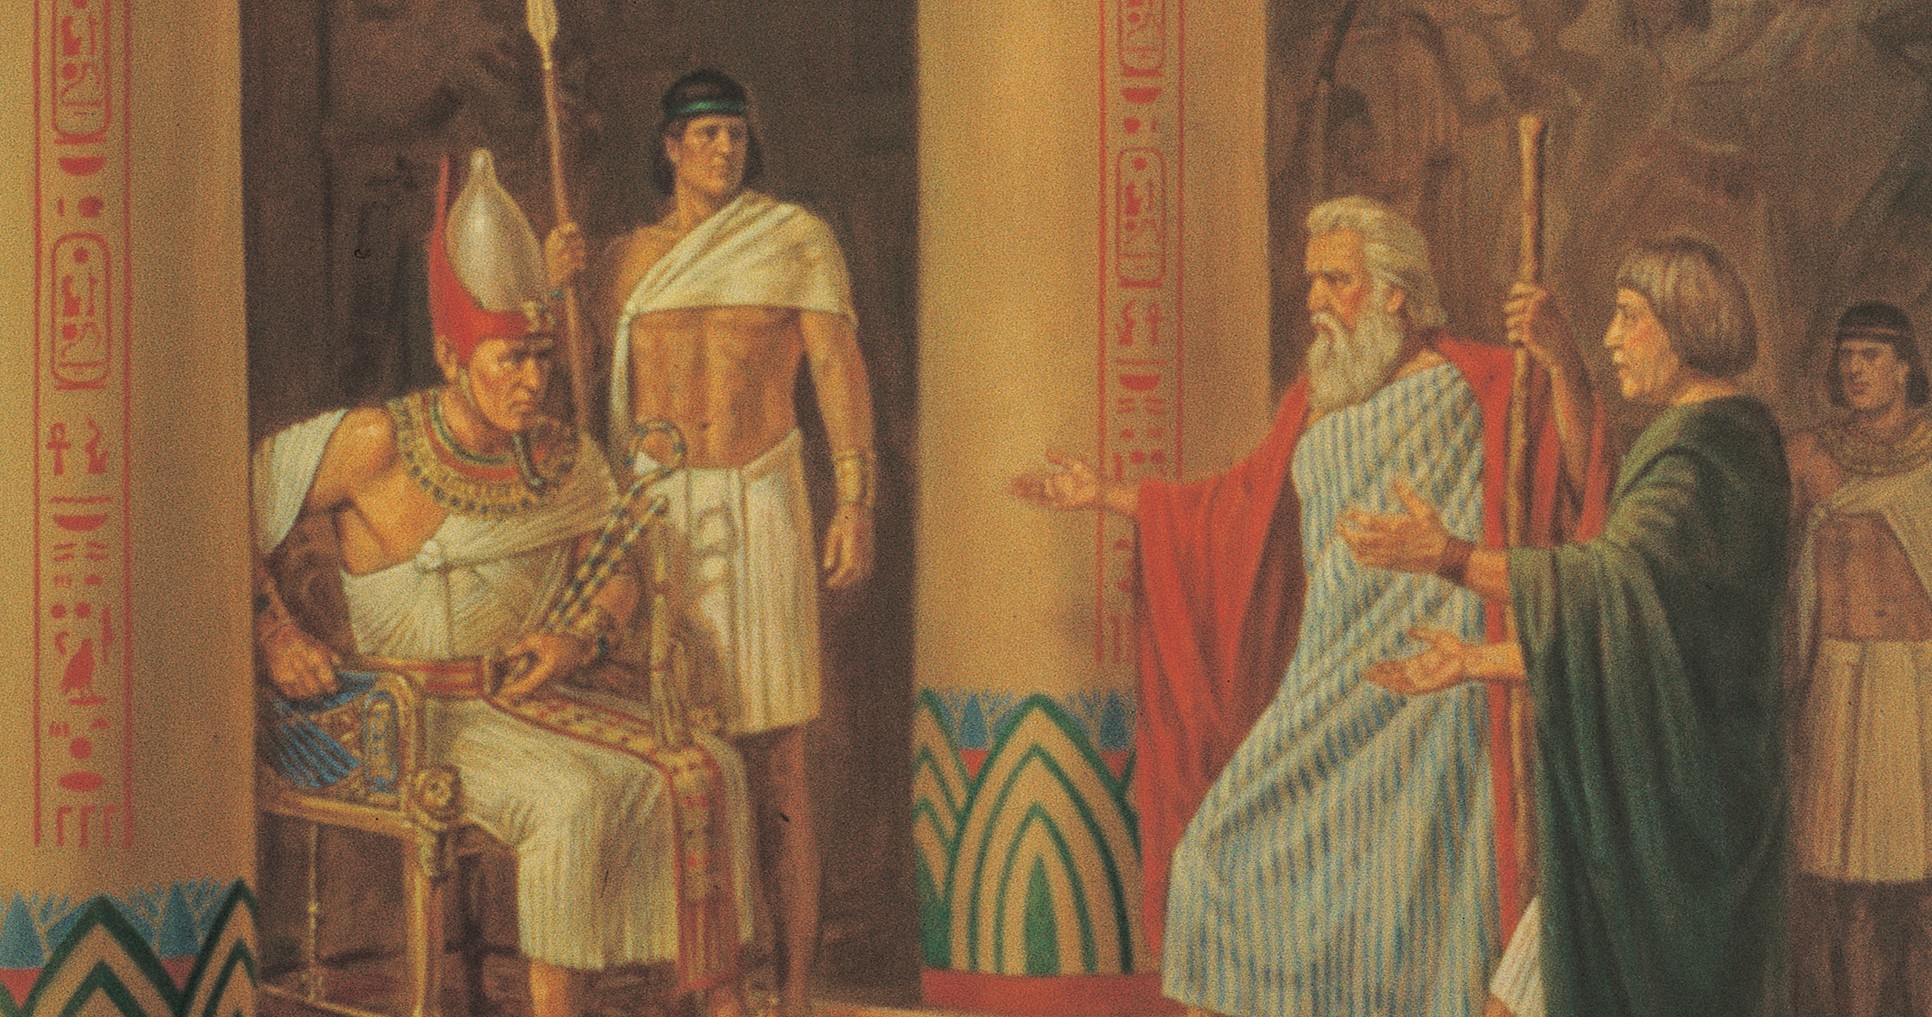 The Old Testament prophet Moses and his brother Aaron standing in the Court of the Pharaoh of Egypt. Moses and Aaron are petitioning for the release of the Israelites from bondage. A guard is standing by the Pharaoh.